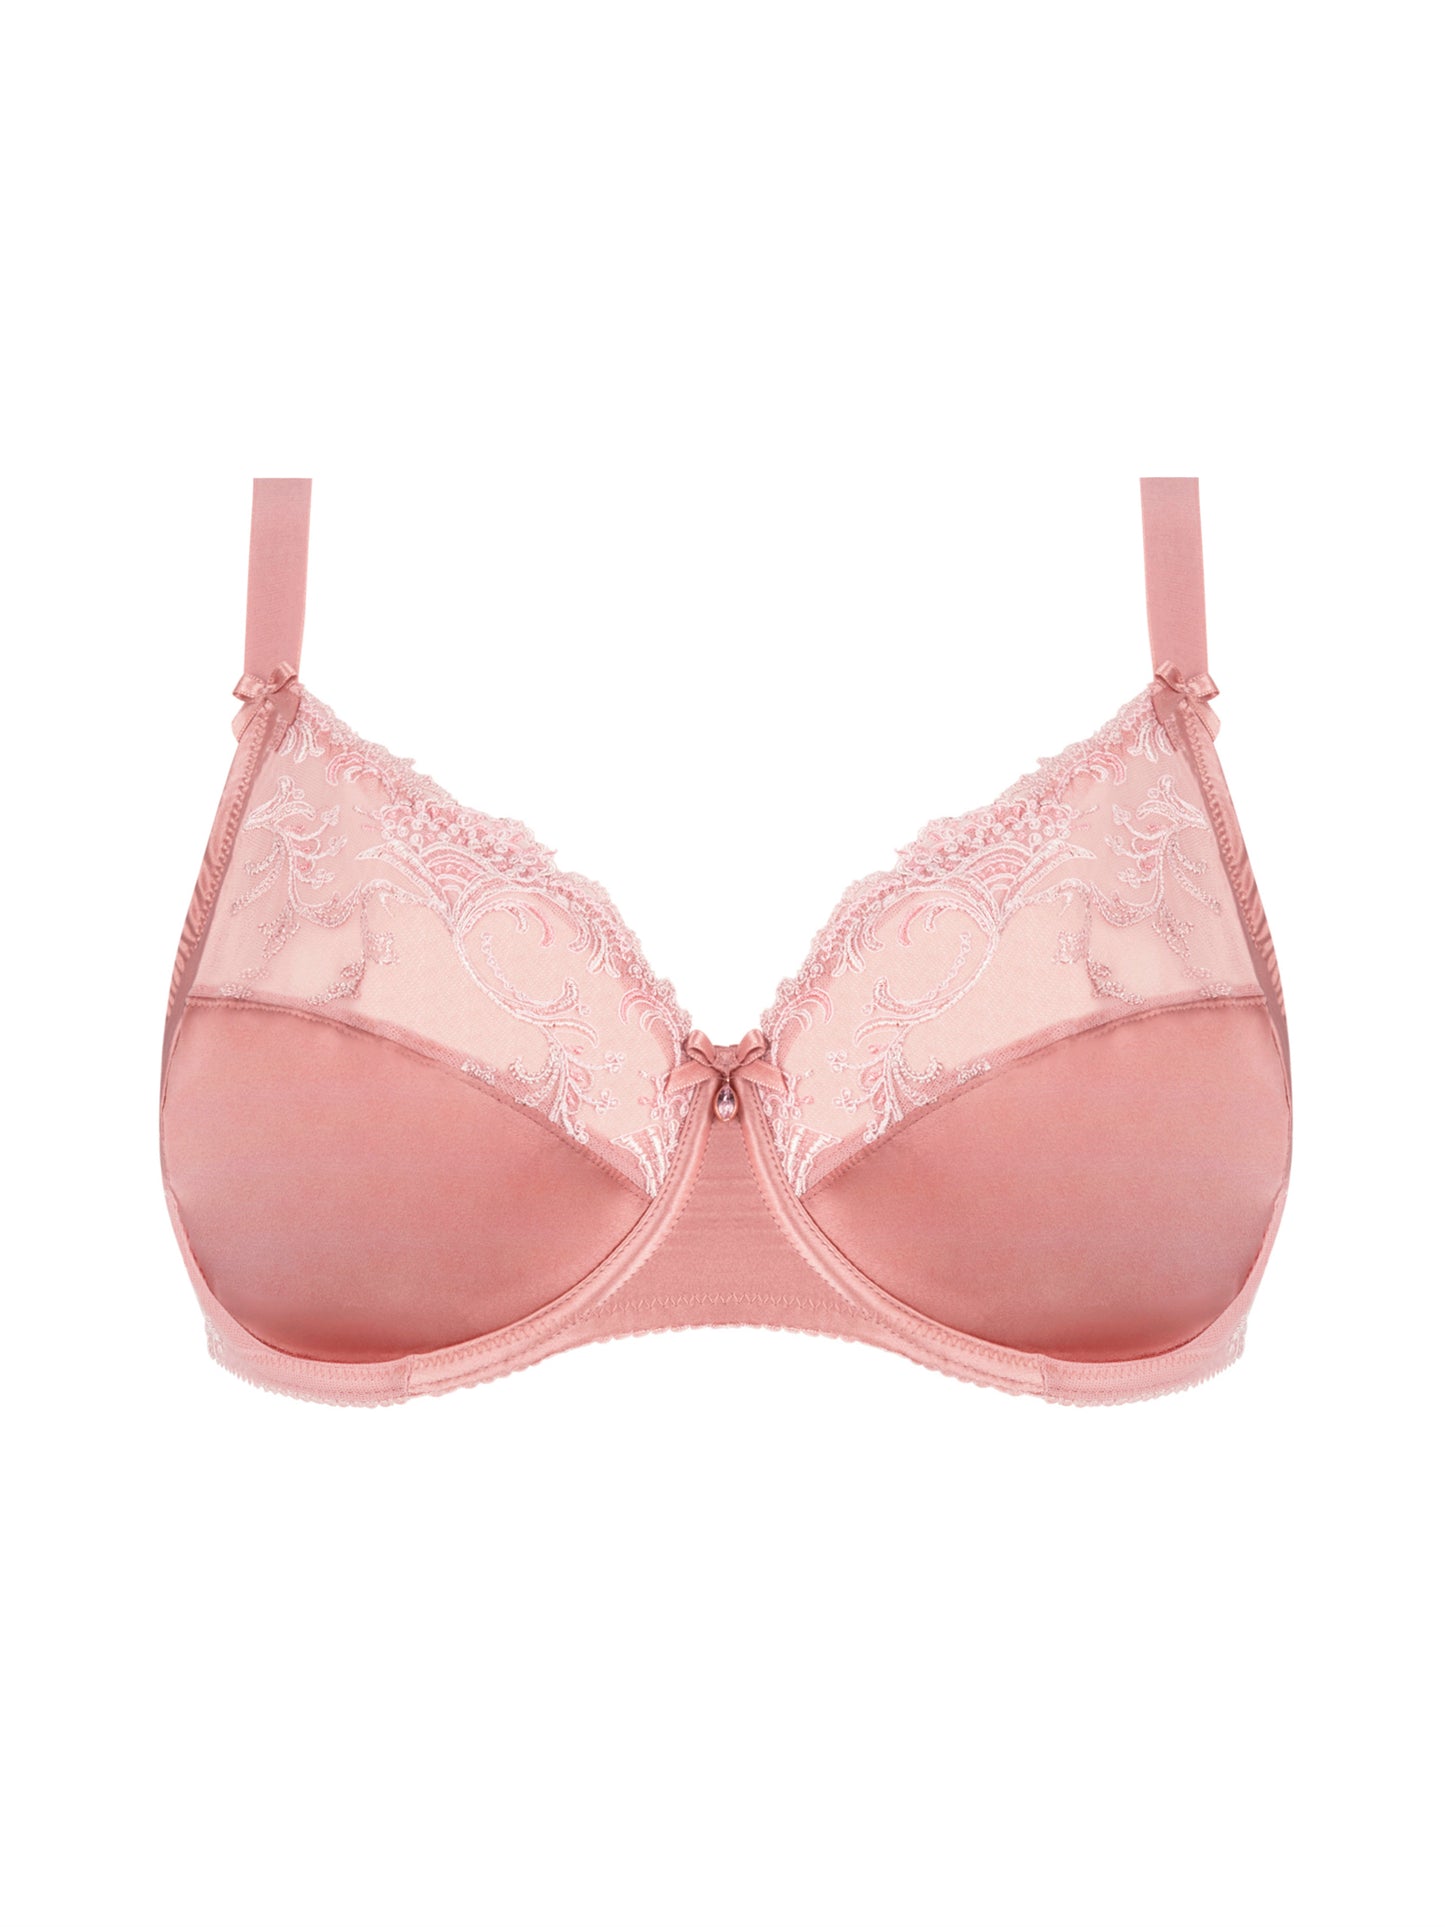 Splendeur Soie Pure Silk in Rose By Lise Charmel 3-Parts Full Cup Bra - sizes 36-44 D-F (US sizes)